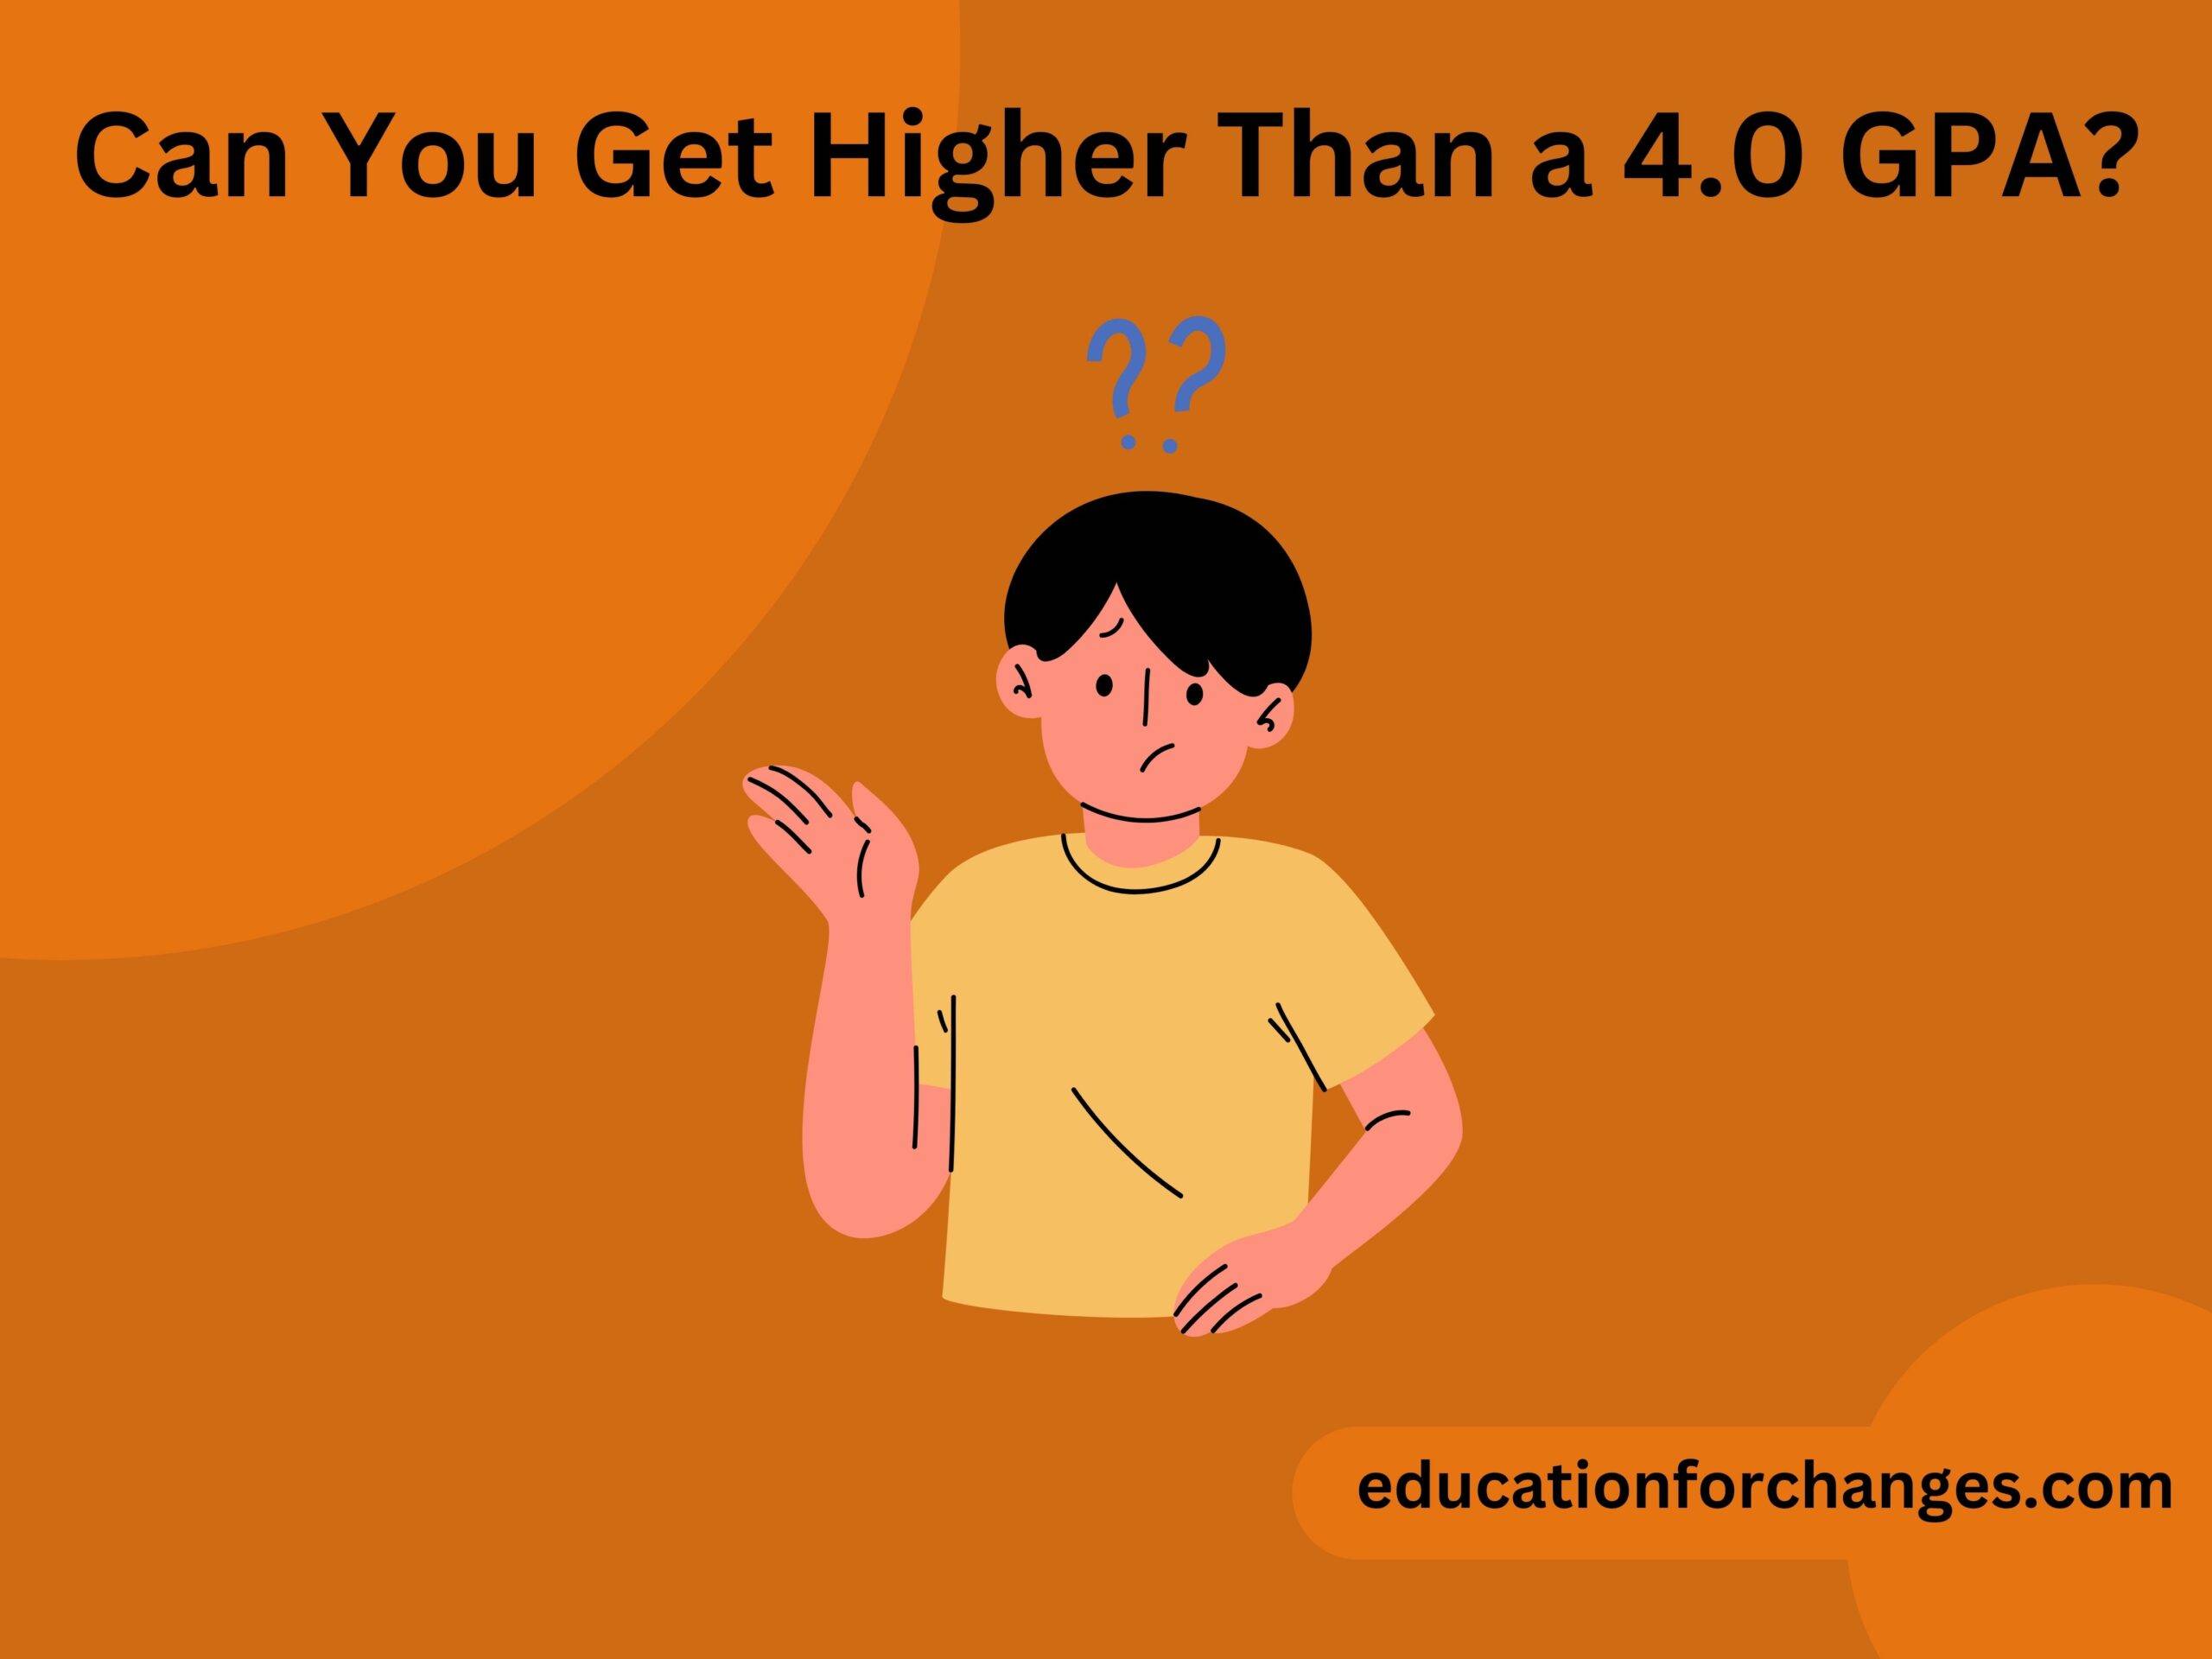 Can You Get Higher Than a 4.0 GPA